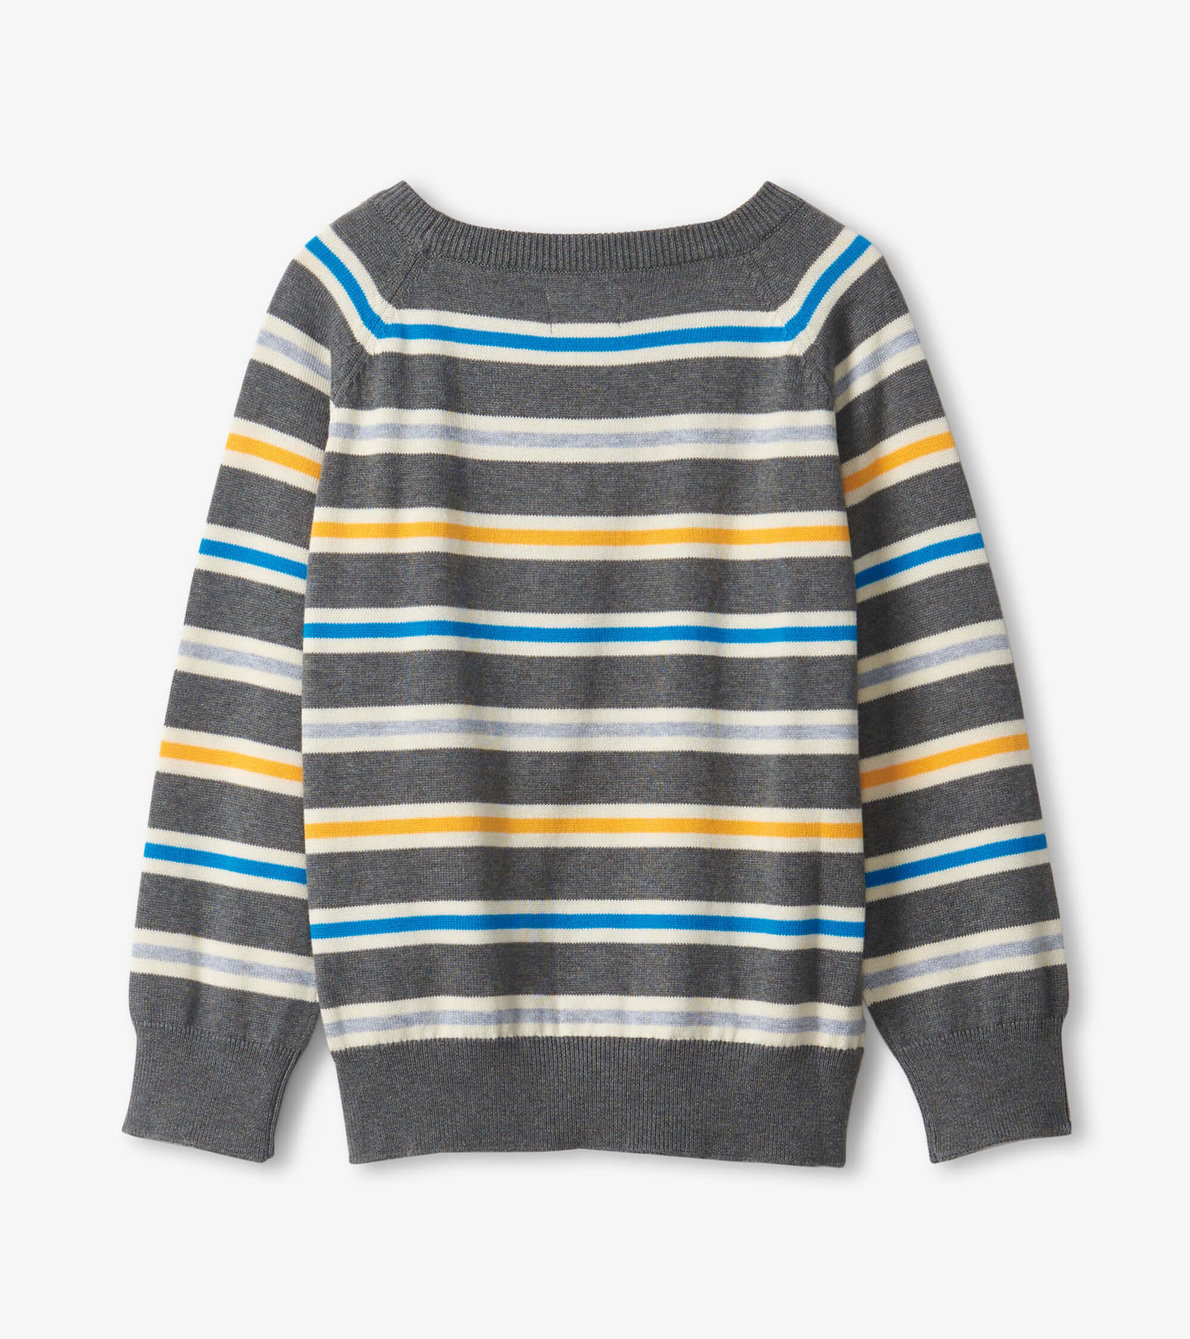 View larger image of Boys Dino Stripes Crew Neck Sweater